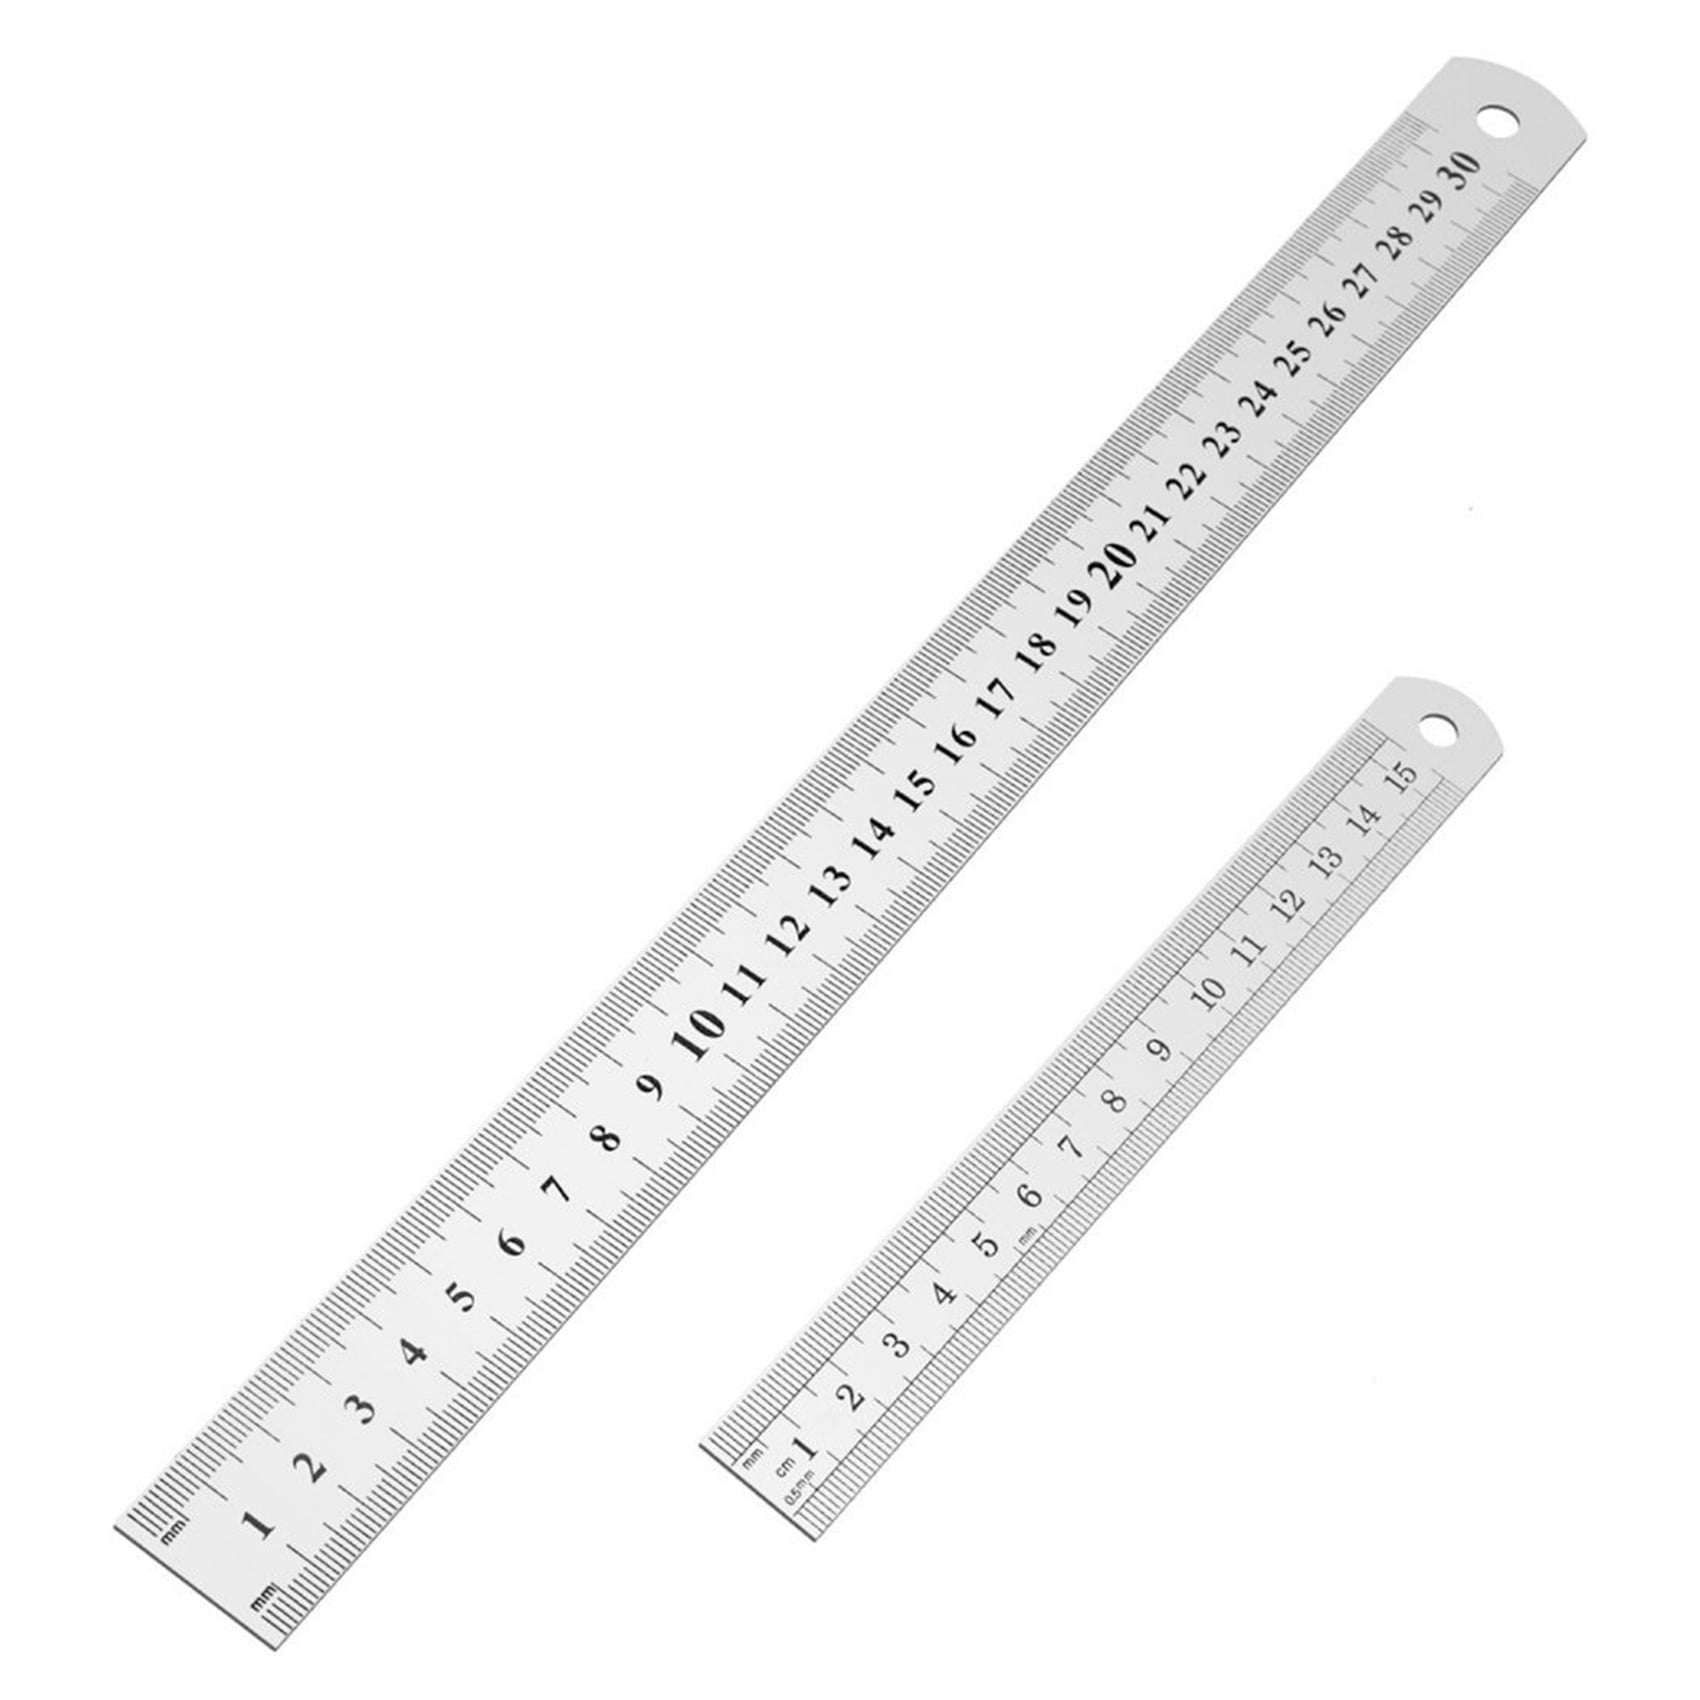 Teskyer Ruler, Set of 3 Pack, 6 Inch, 8 Inch and 12 Inch Stainless Steel  Metal Rulers for Home School Office Daily Use